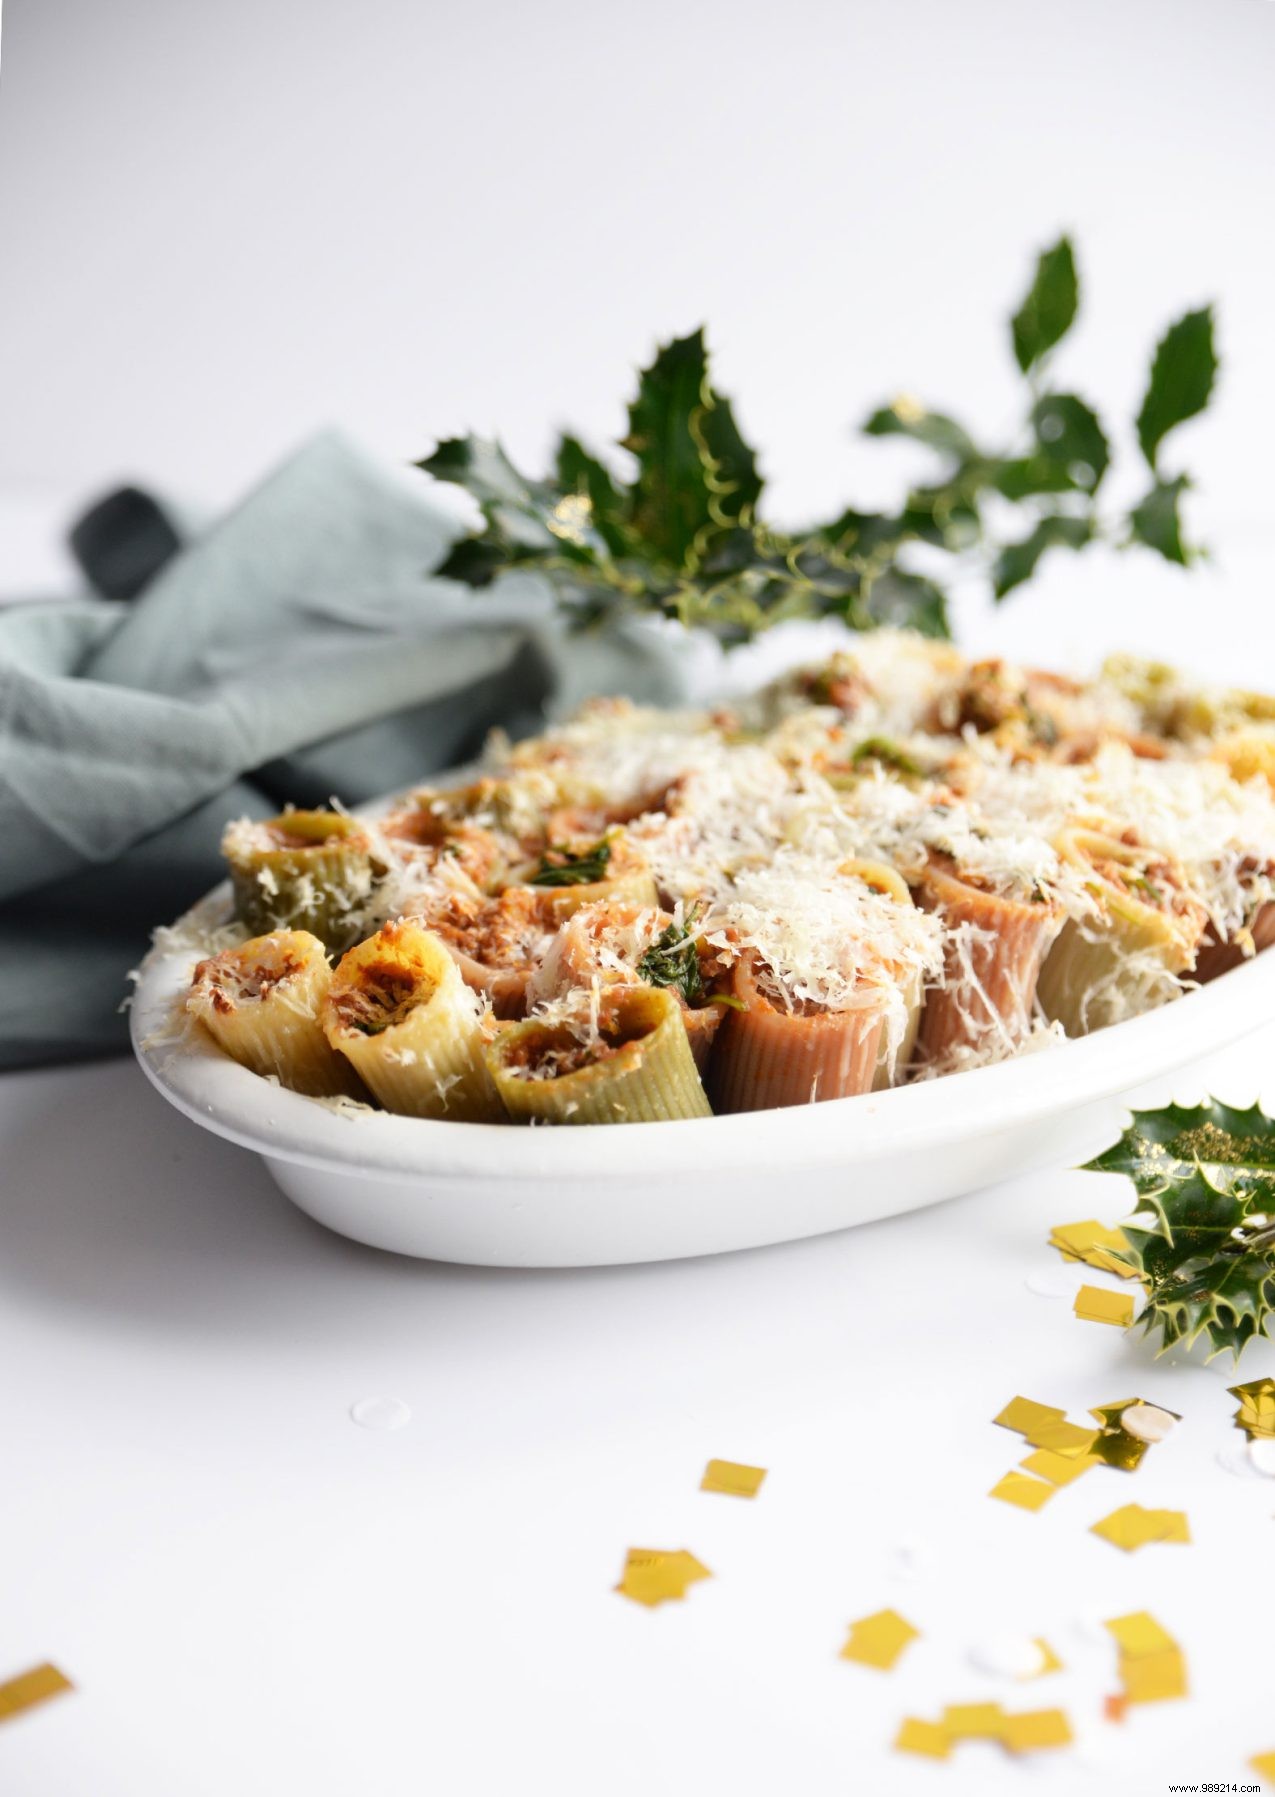 Recipe for stuffed pasta from the oven 